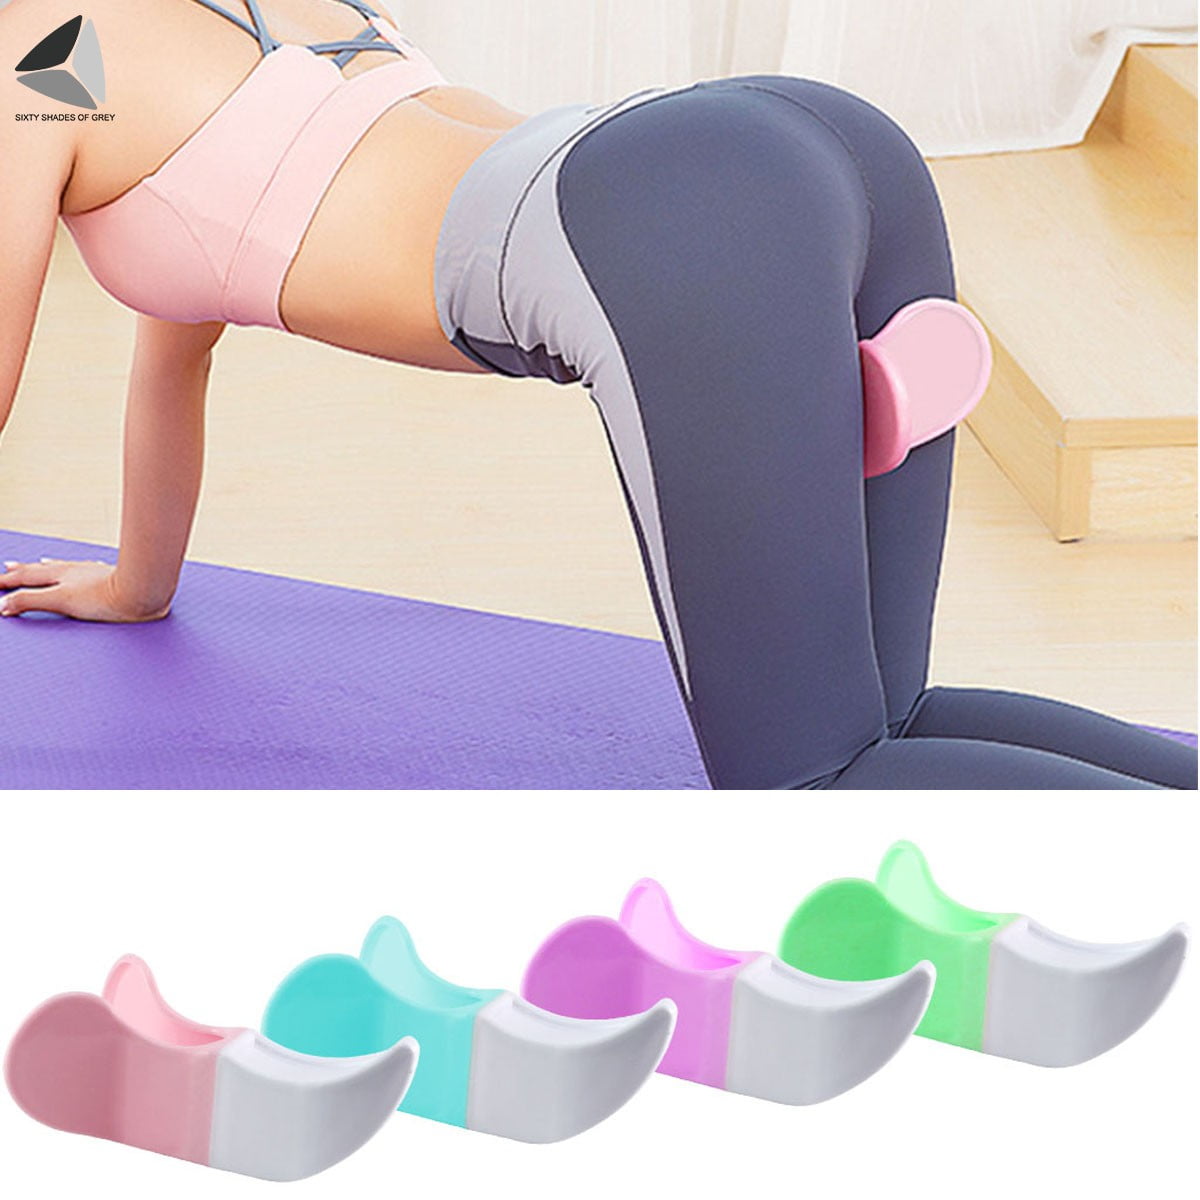 Pelvic Floor Muscle Trainer, Cushion Type Kegel Trainer, for Pelvic Floor  Physical Therapy and Kegel Sports Products Grey(upgrade)